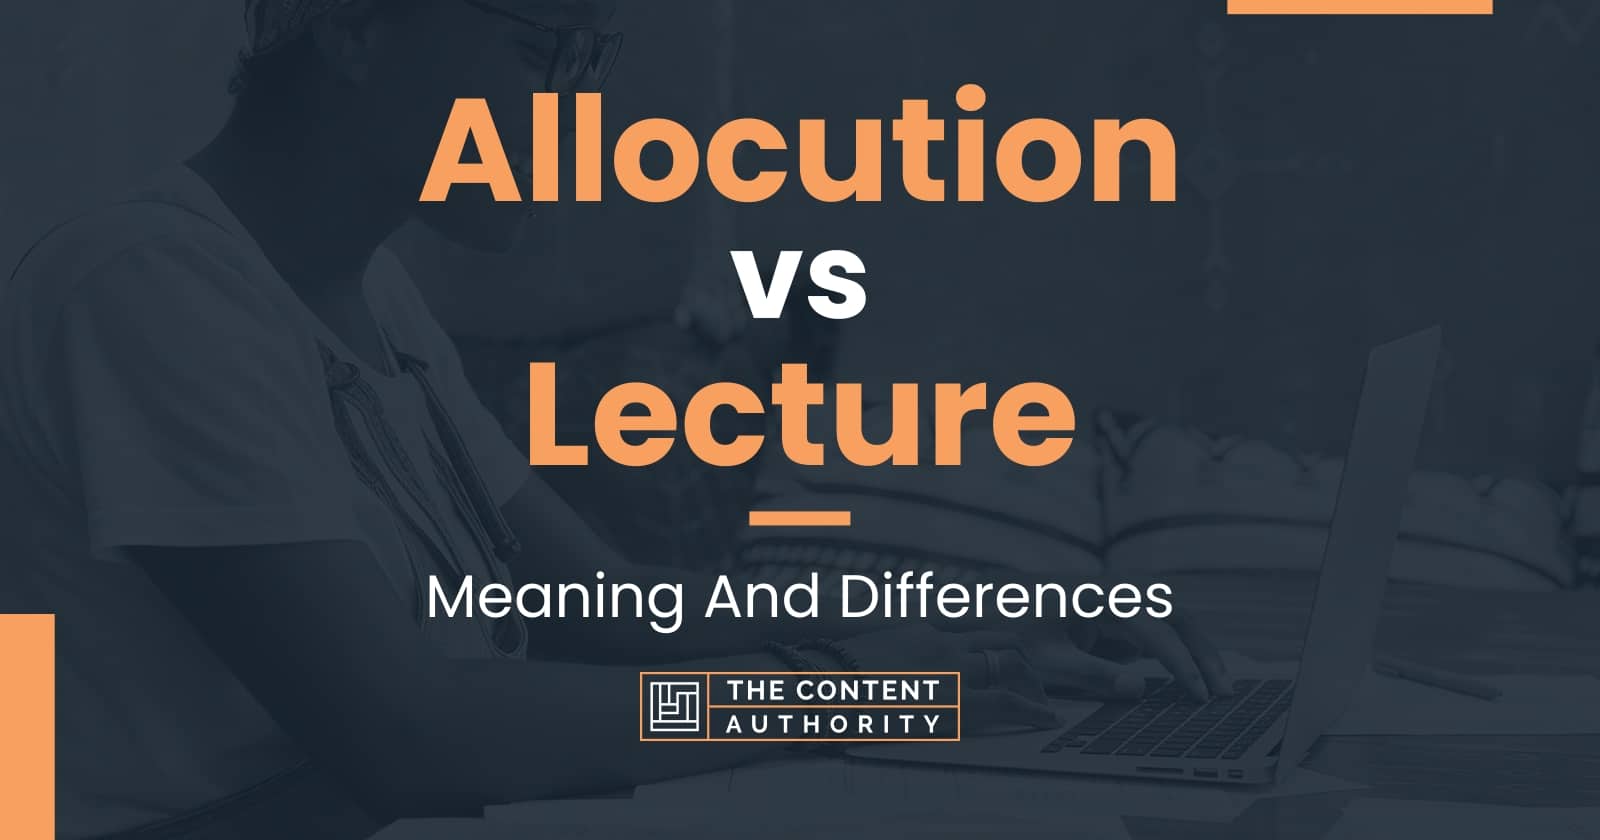 Allocution vs Lecture: Meaning And Differences